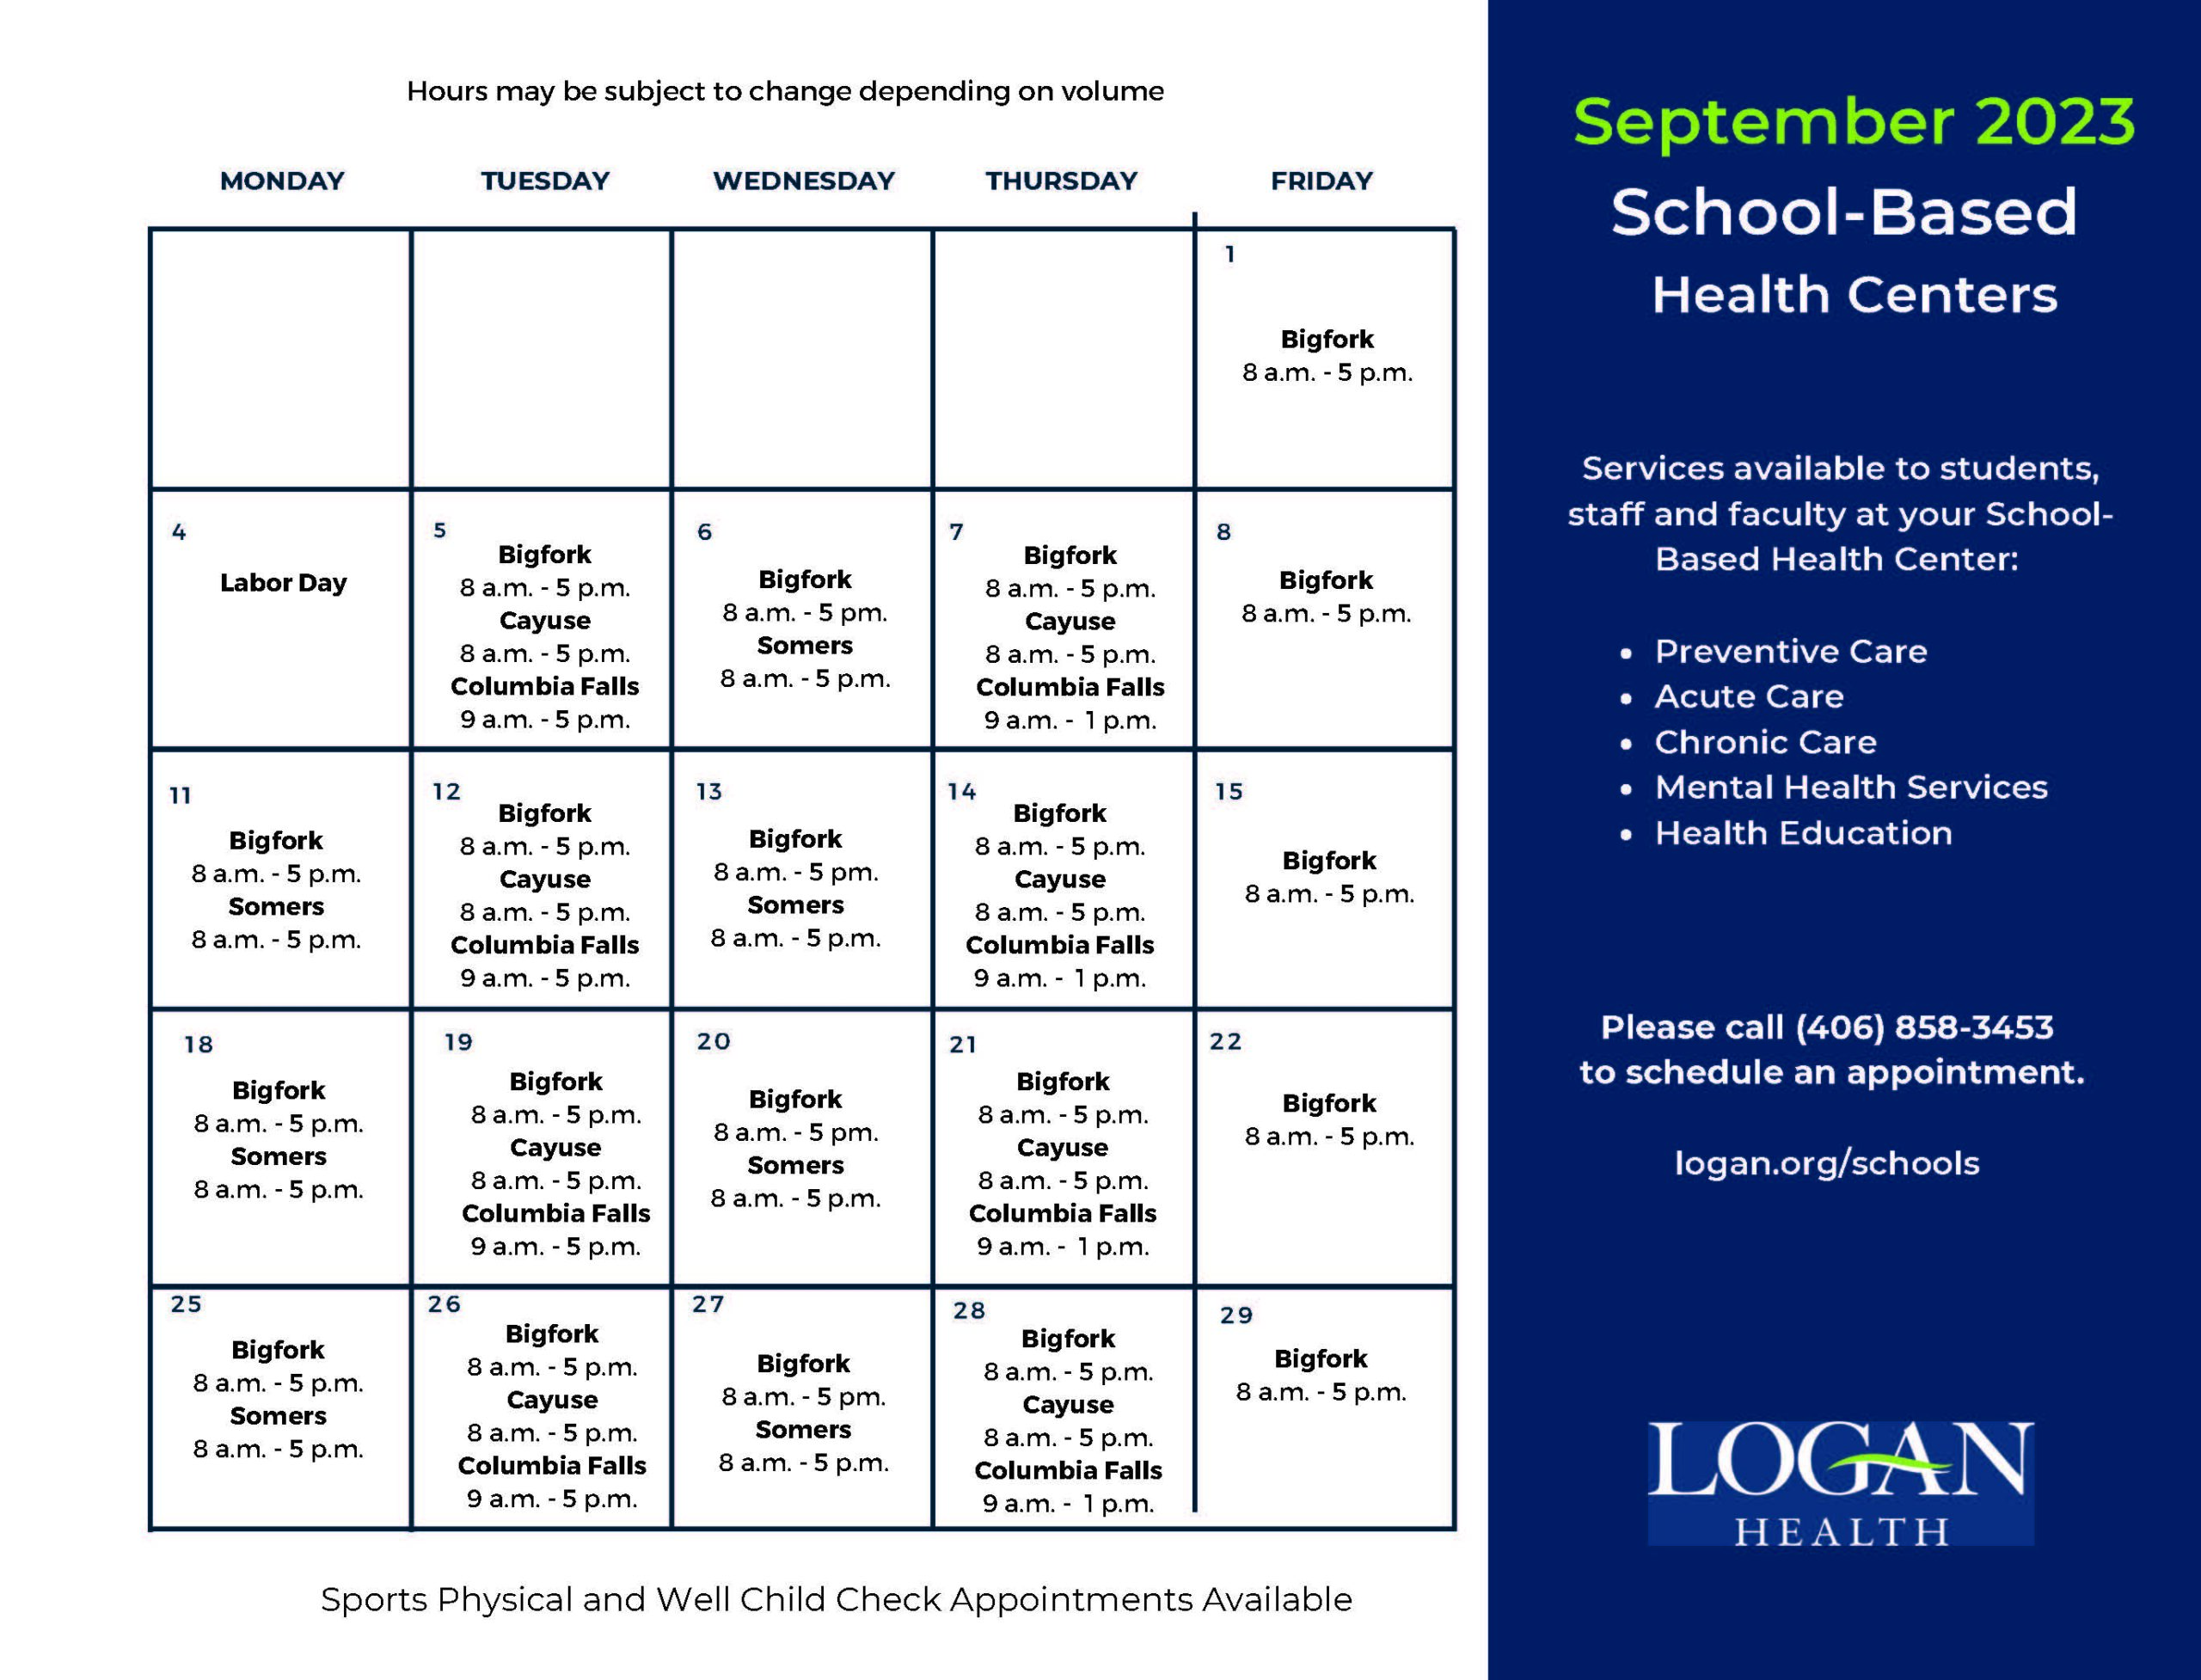 September schedule for the school-based health center showing that the Bigfork location is open every weekday from 8 am to 5 pm.